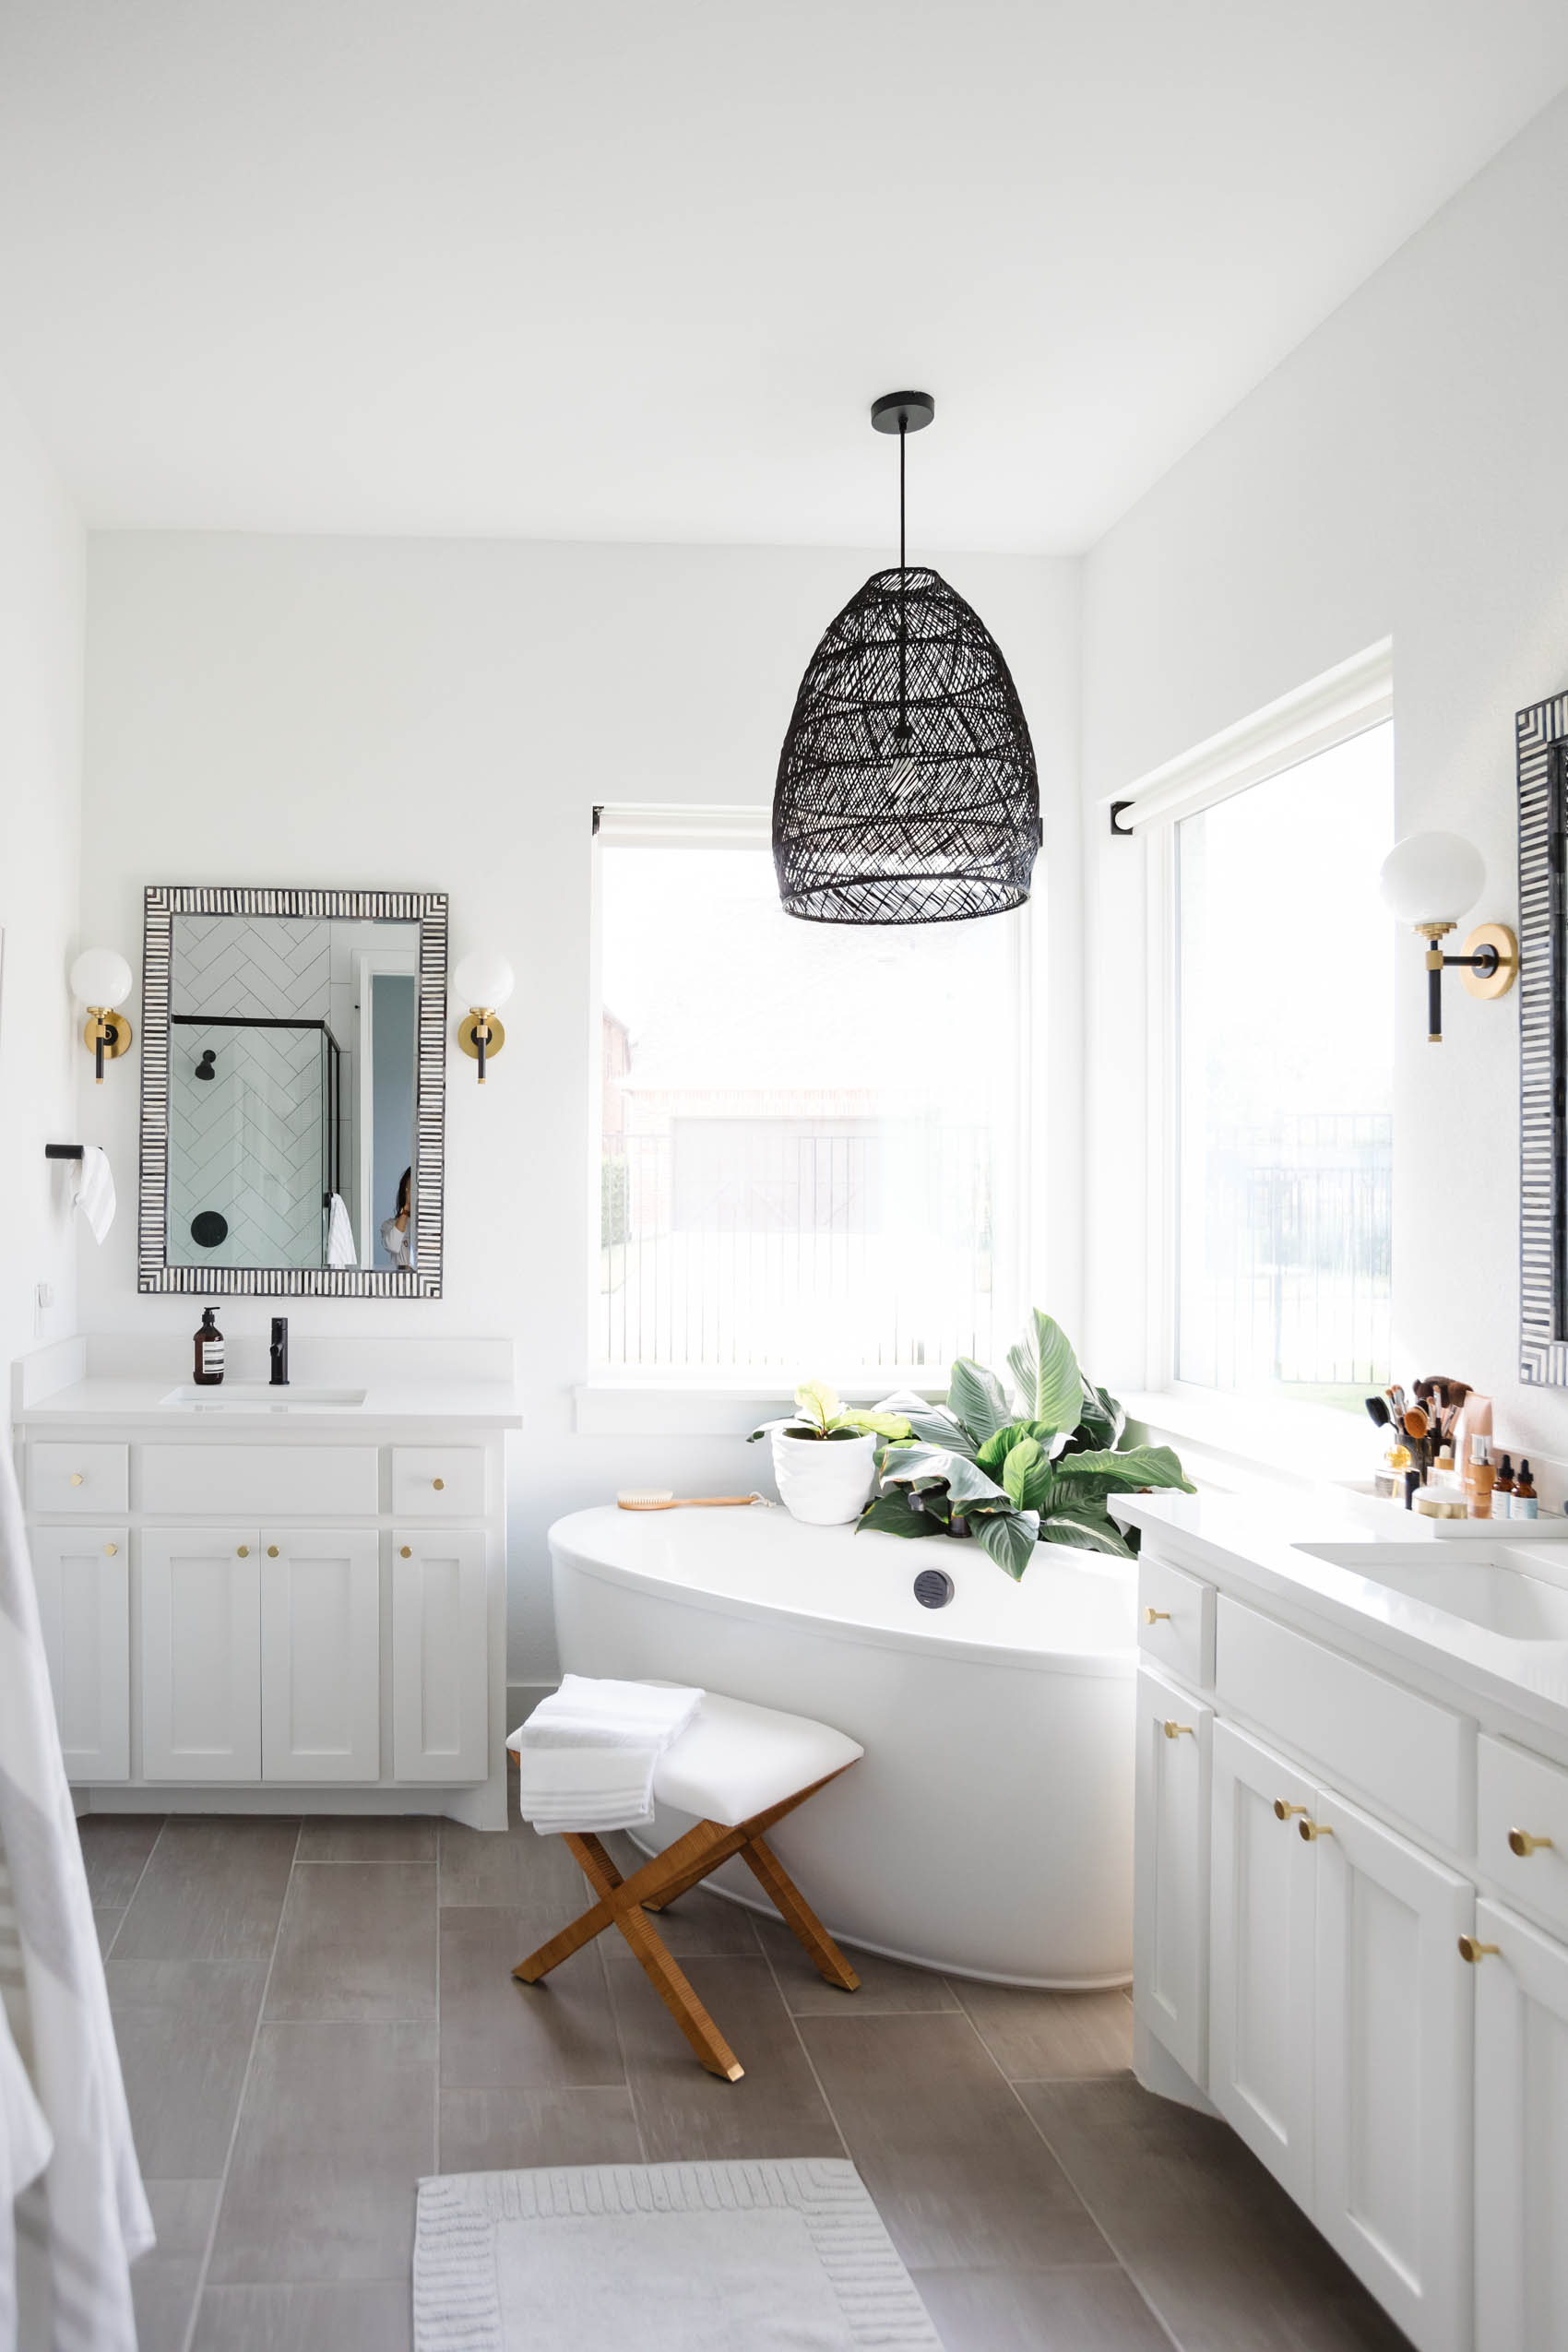 Blogger Hoang-Kim Cung's white transitional bathroom with luxury bathroom accessories like a Serena & Lily pendant, Bar Harbor Mirrors, Hudson Valley Lighting Bowery sconces, balboa X stool and more